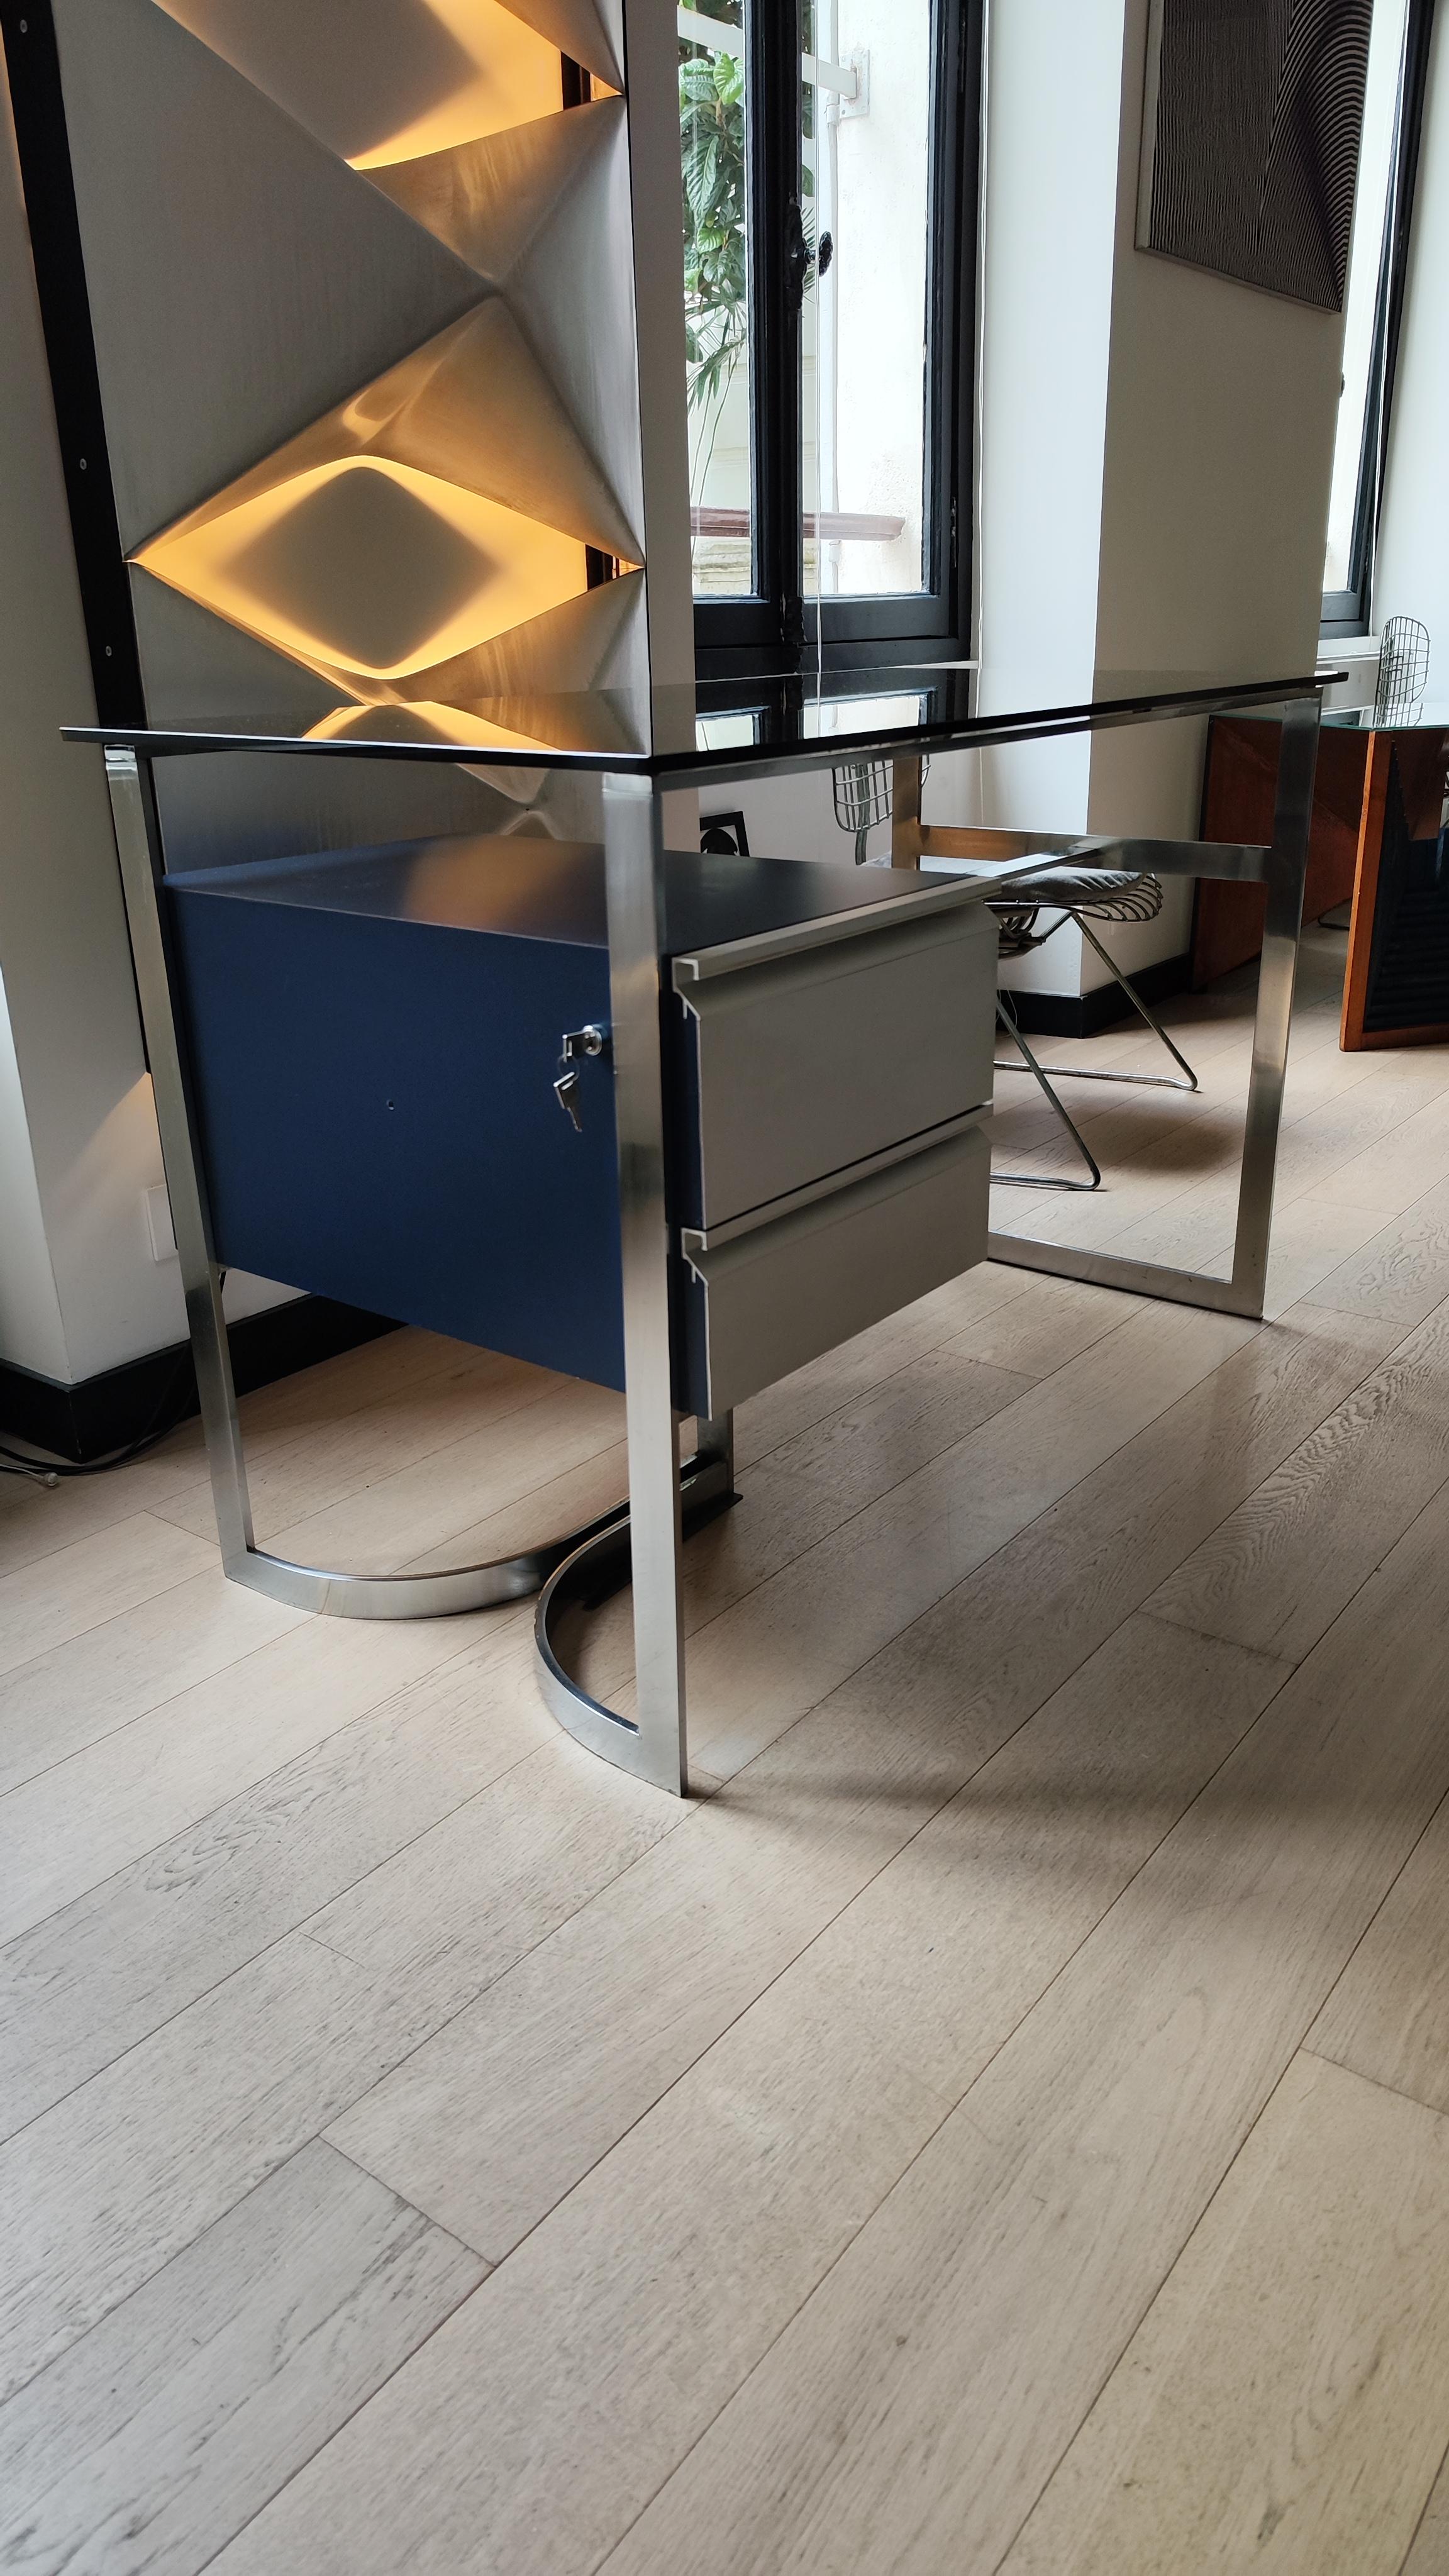 Late 20th Century Patrice Maffei Desk for Kappa, 70s, Brushed Stainless Steel, Smoked Glass, 1970 For Sale